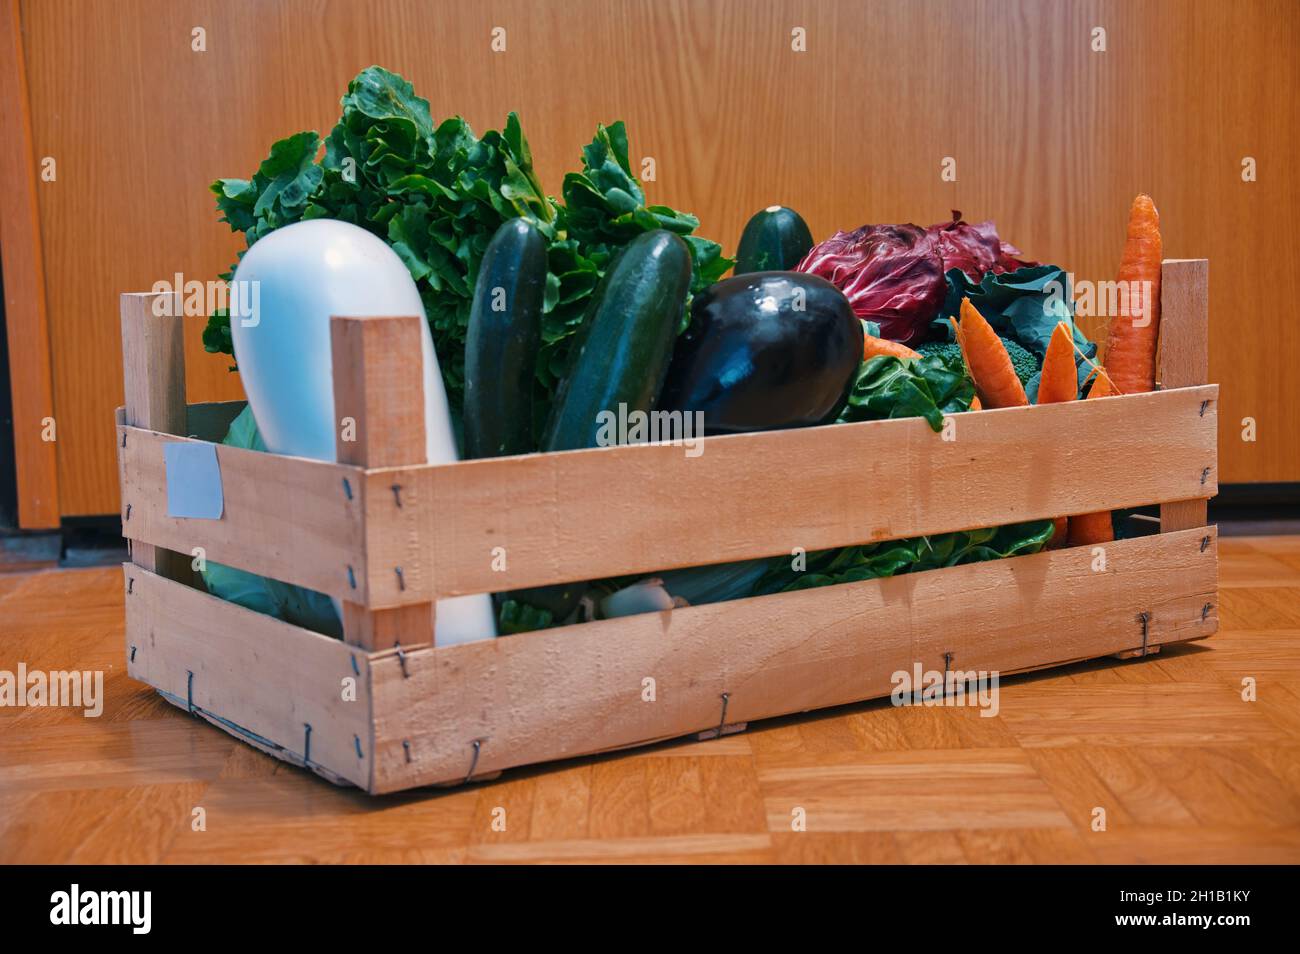 Healthy vegetables in wooden box delivered to the front door Stock Photo